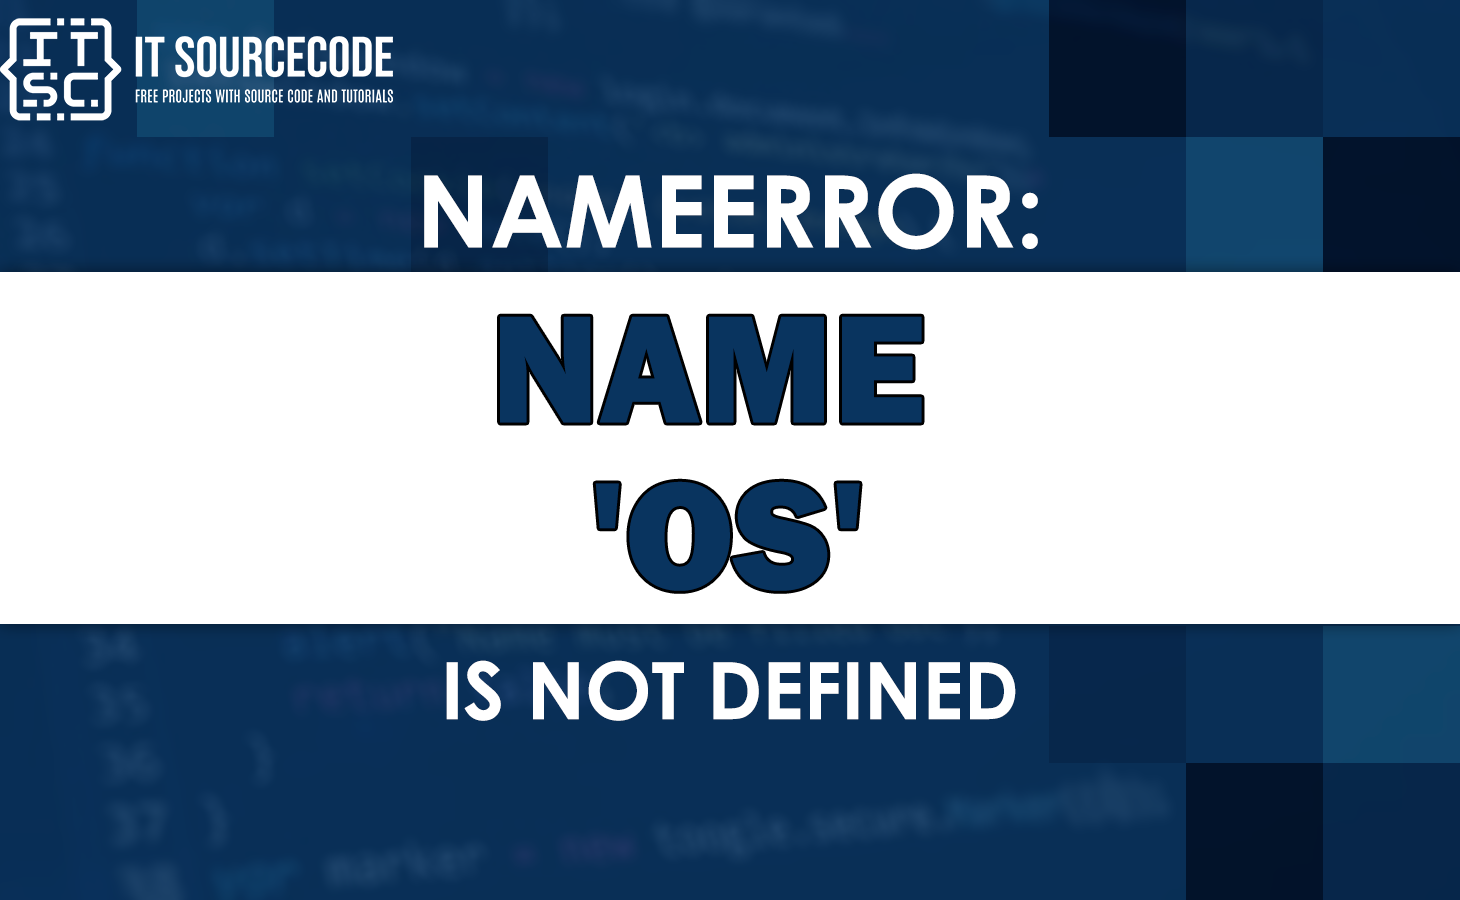 Nameerror: name os is not defined